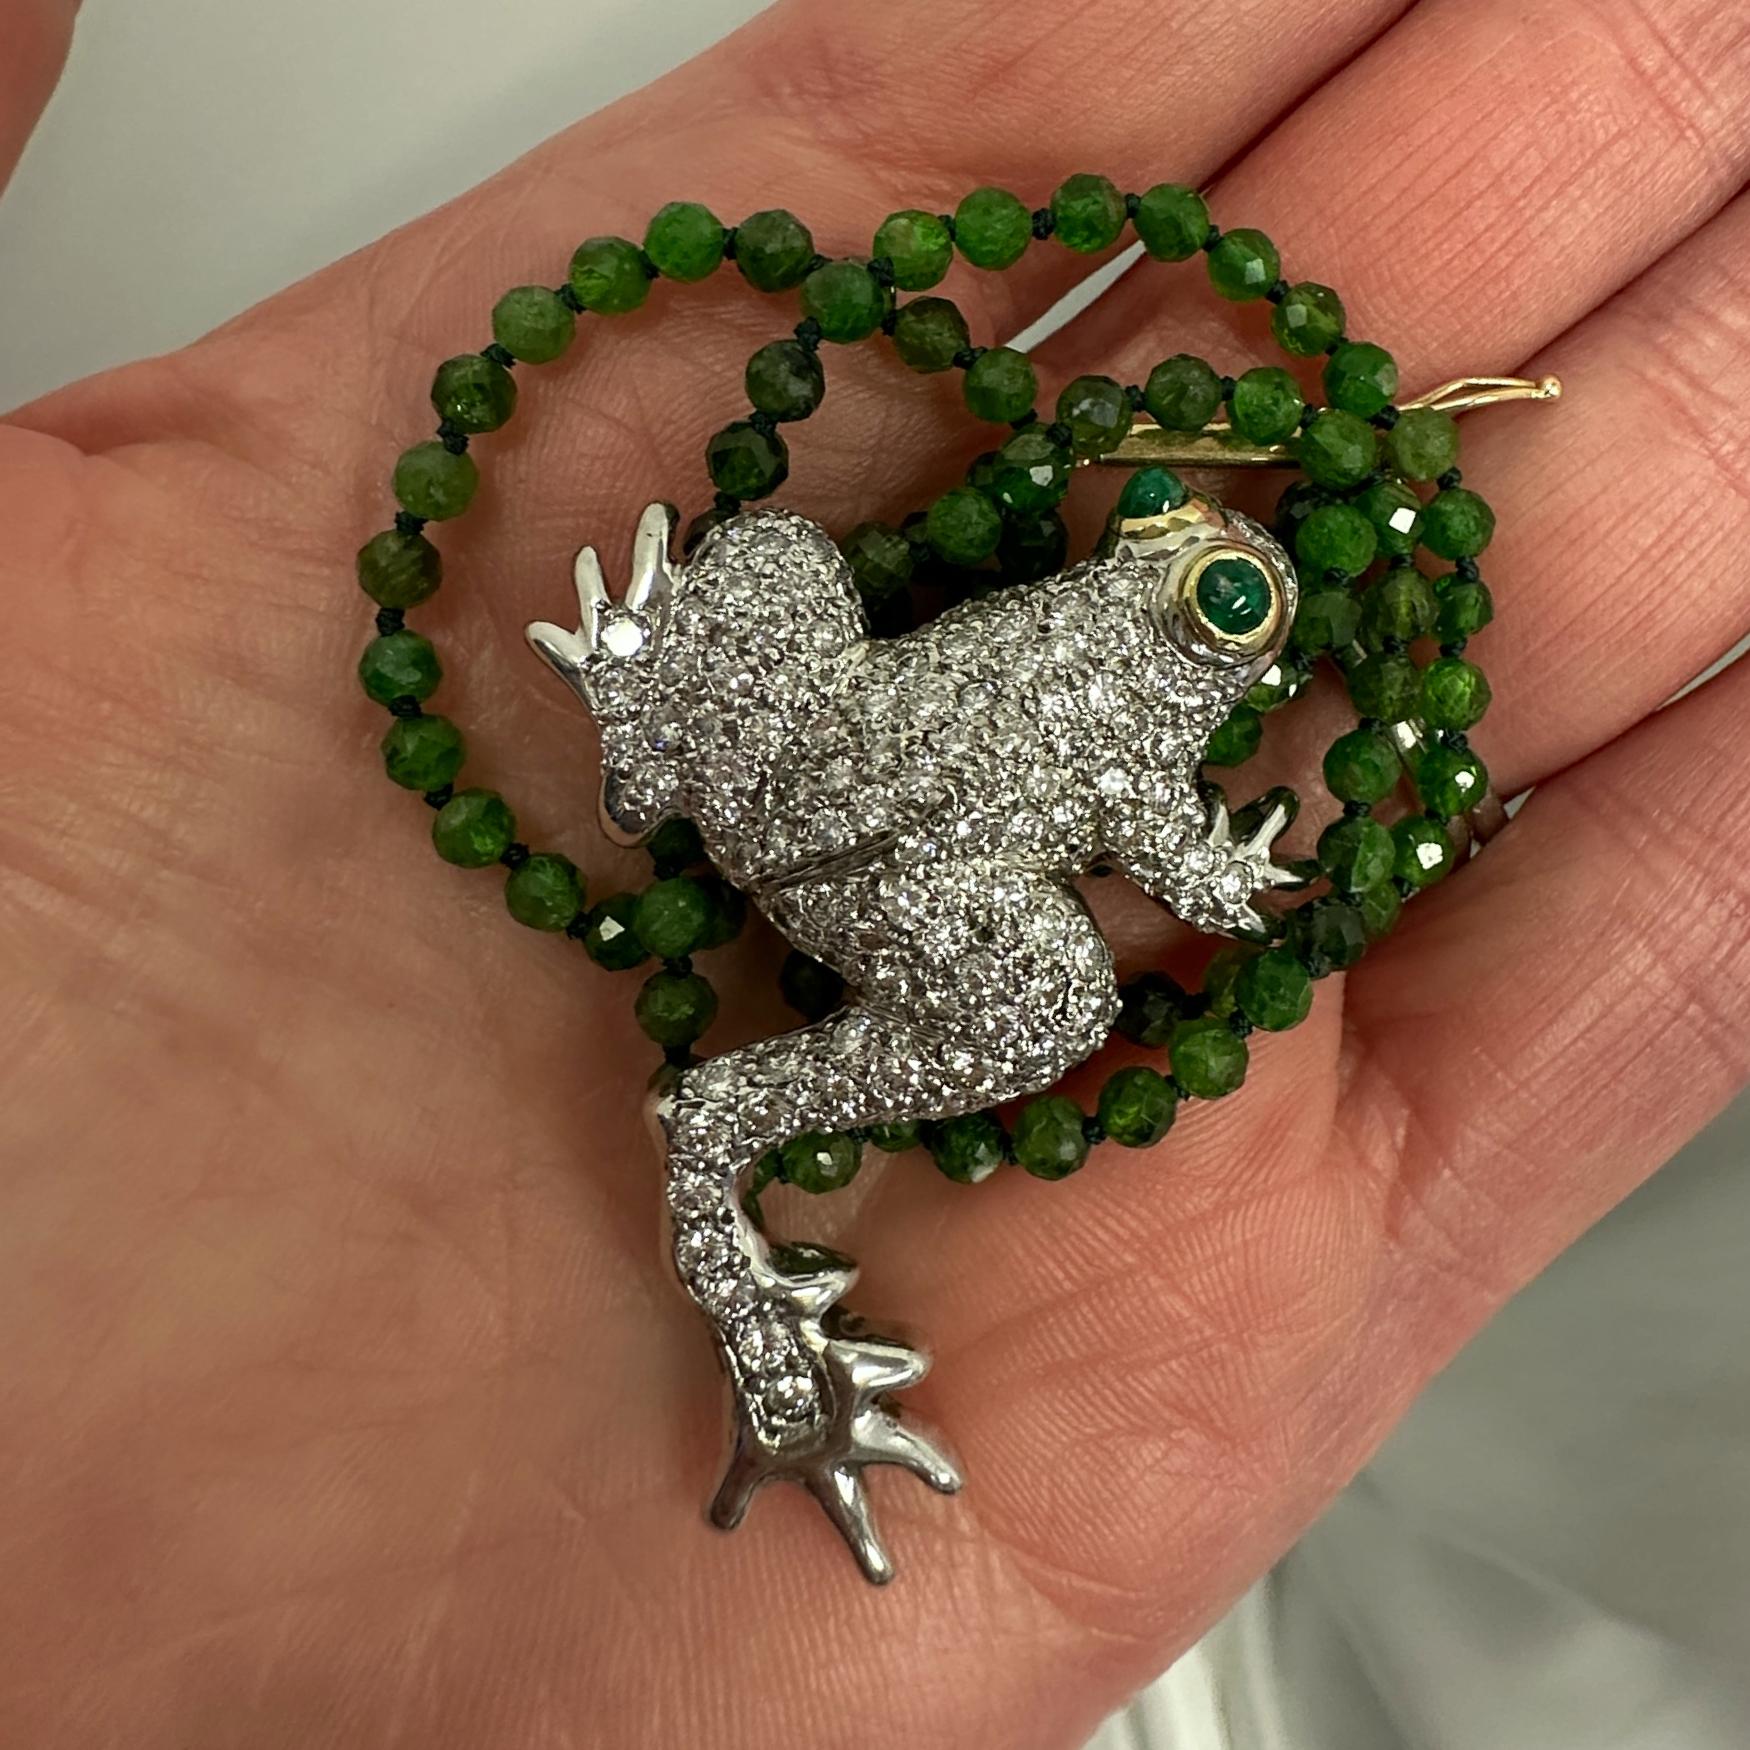 2.5 Carat Pavé Diamond Frog Pendant in White Gold on Chrome Diopside Bead Chain For Sale 4